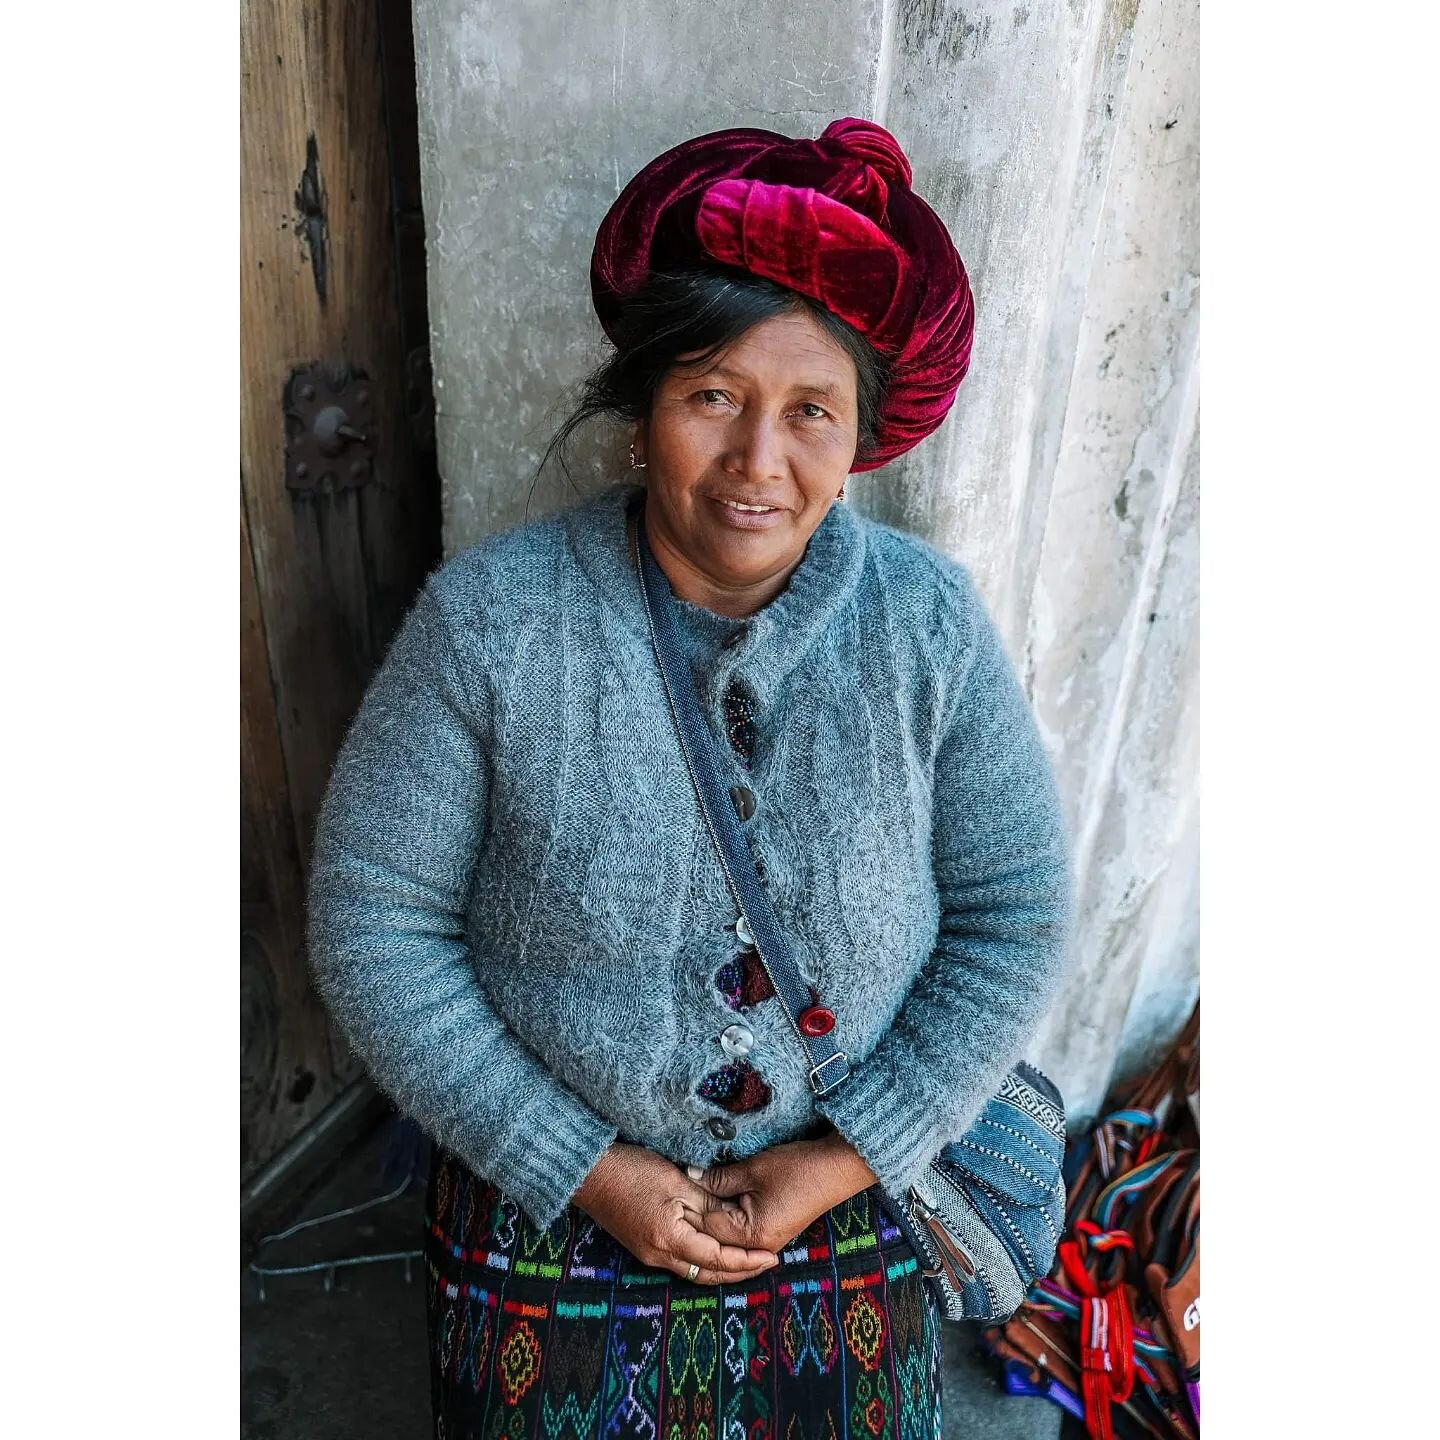 &quot;Visualize your highest self then show up as her.&quot;
.
She did nothing less. I swear. 
.
Woman sells at Market in Quetzaltenango, Guatemala. 2022.
.
#Guatemala #she #woman #businessowner #travel #travelphotographer #portrait #portraitphotogra